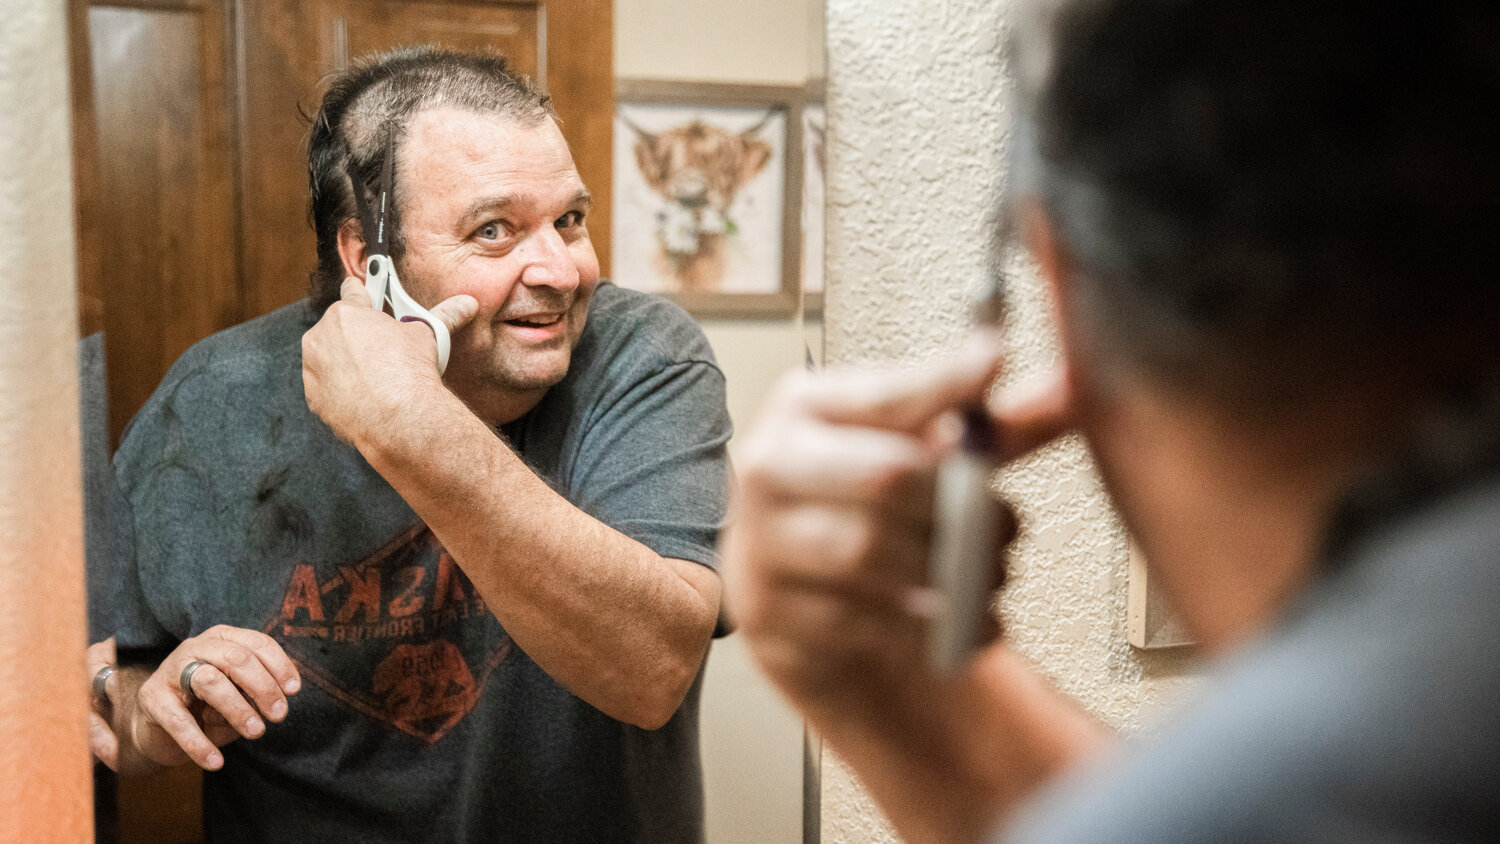 Ken Wiseman smiles into the mirror while holding a pair of scissors to his hair making cuts to raise awareness for Tonja Vlach, a receptionist at I-5 Toyota, who is undergoing chemotherapy for breast cancer and an auction the family is holding online to raise funds this weekend.